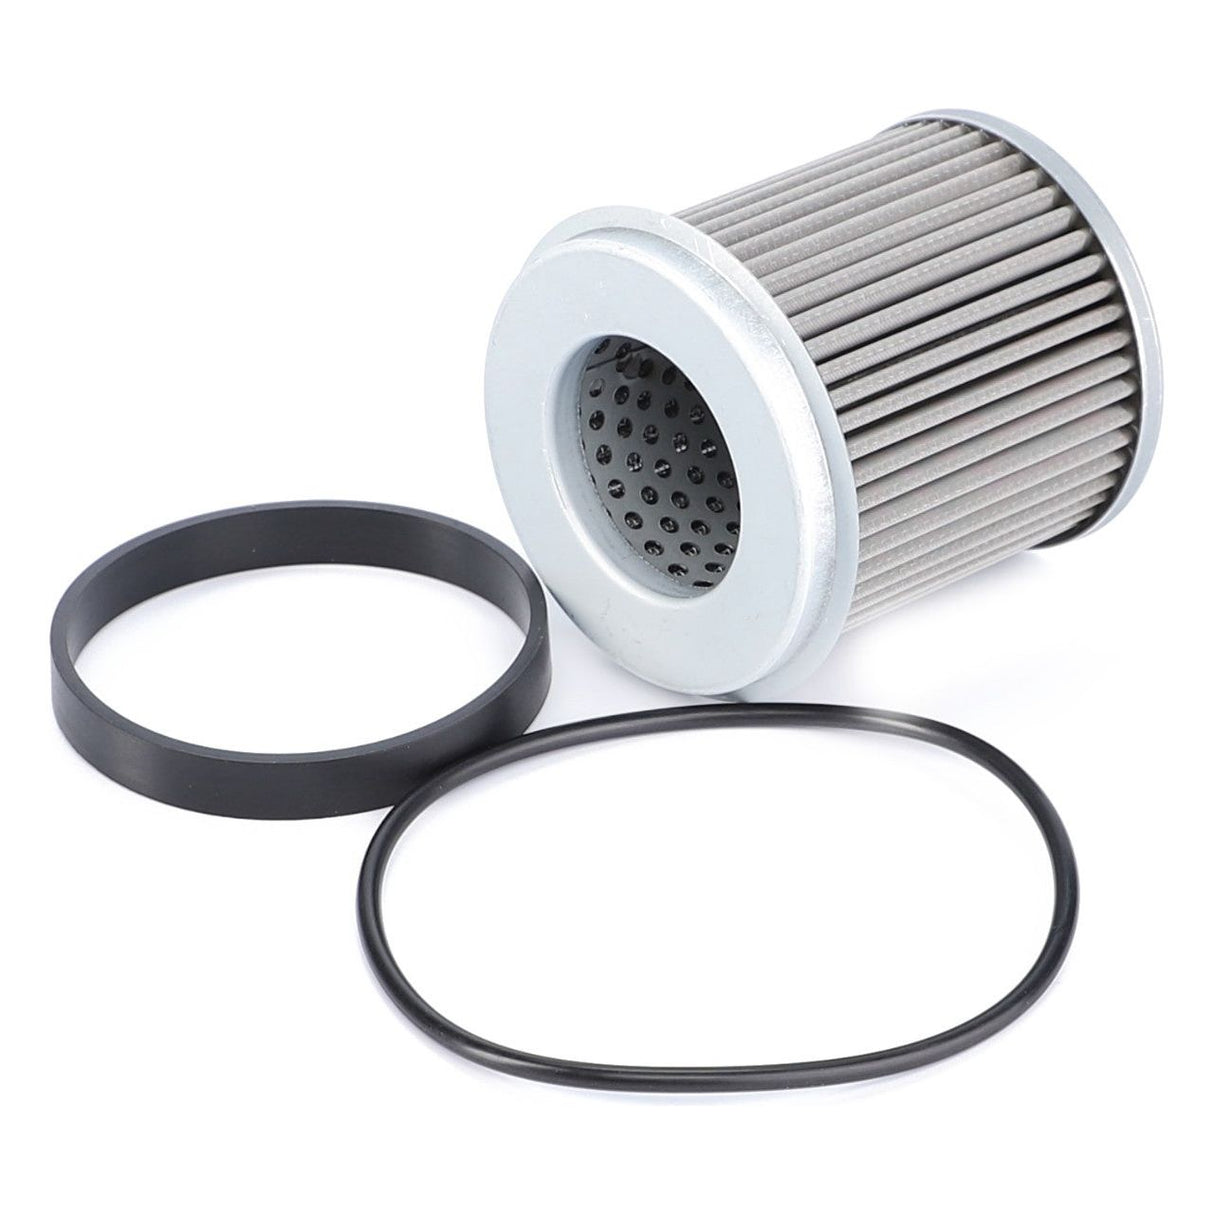 Hydraulic Filter, Suction Filter (Cartridge) - G260100492030 - Farming Parts